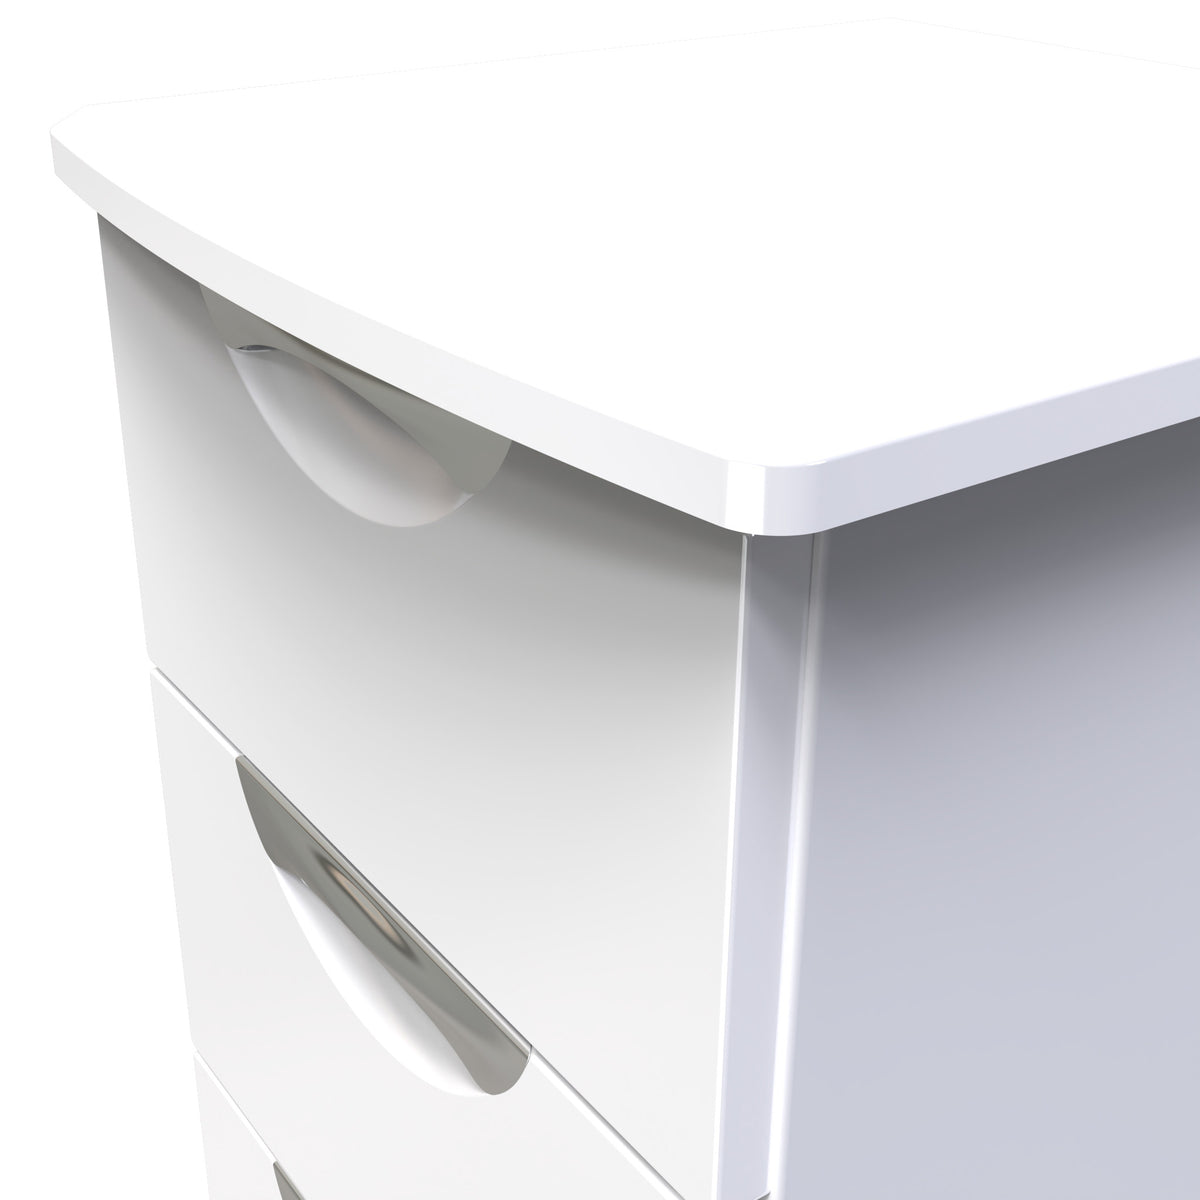 Beckett White 3 Drawer Bedside Table by Roseland Furniture